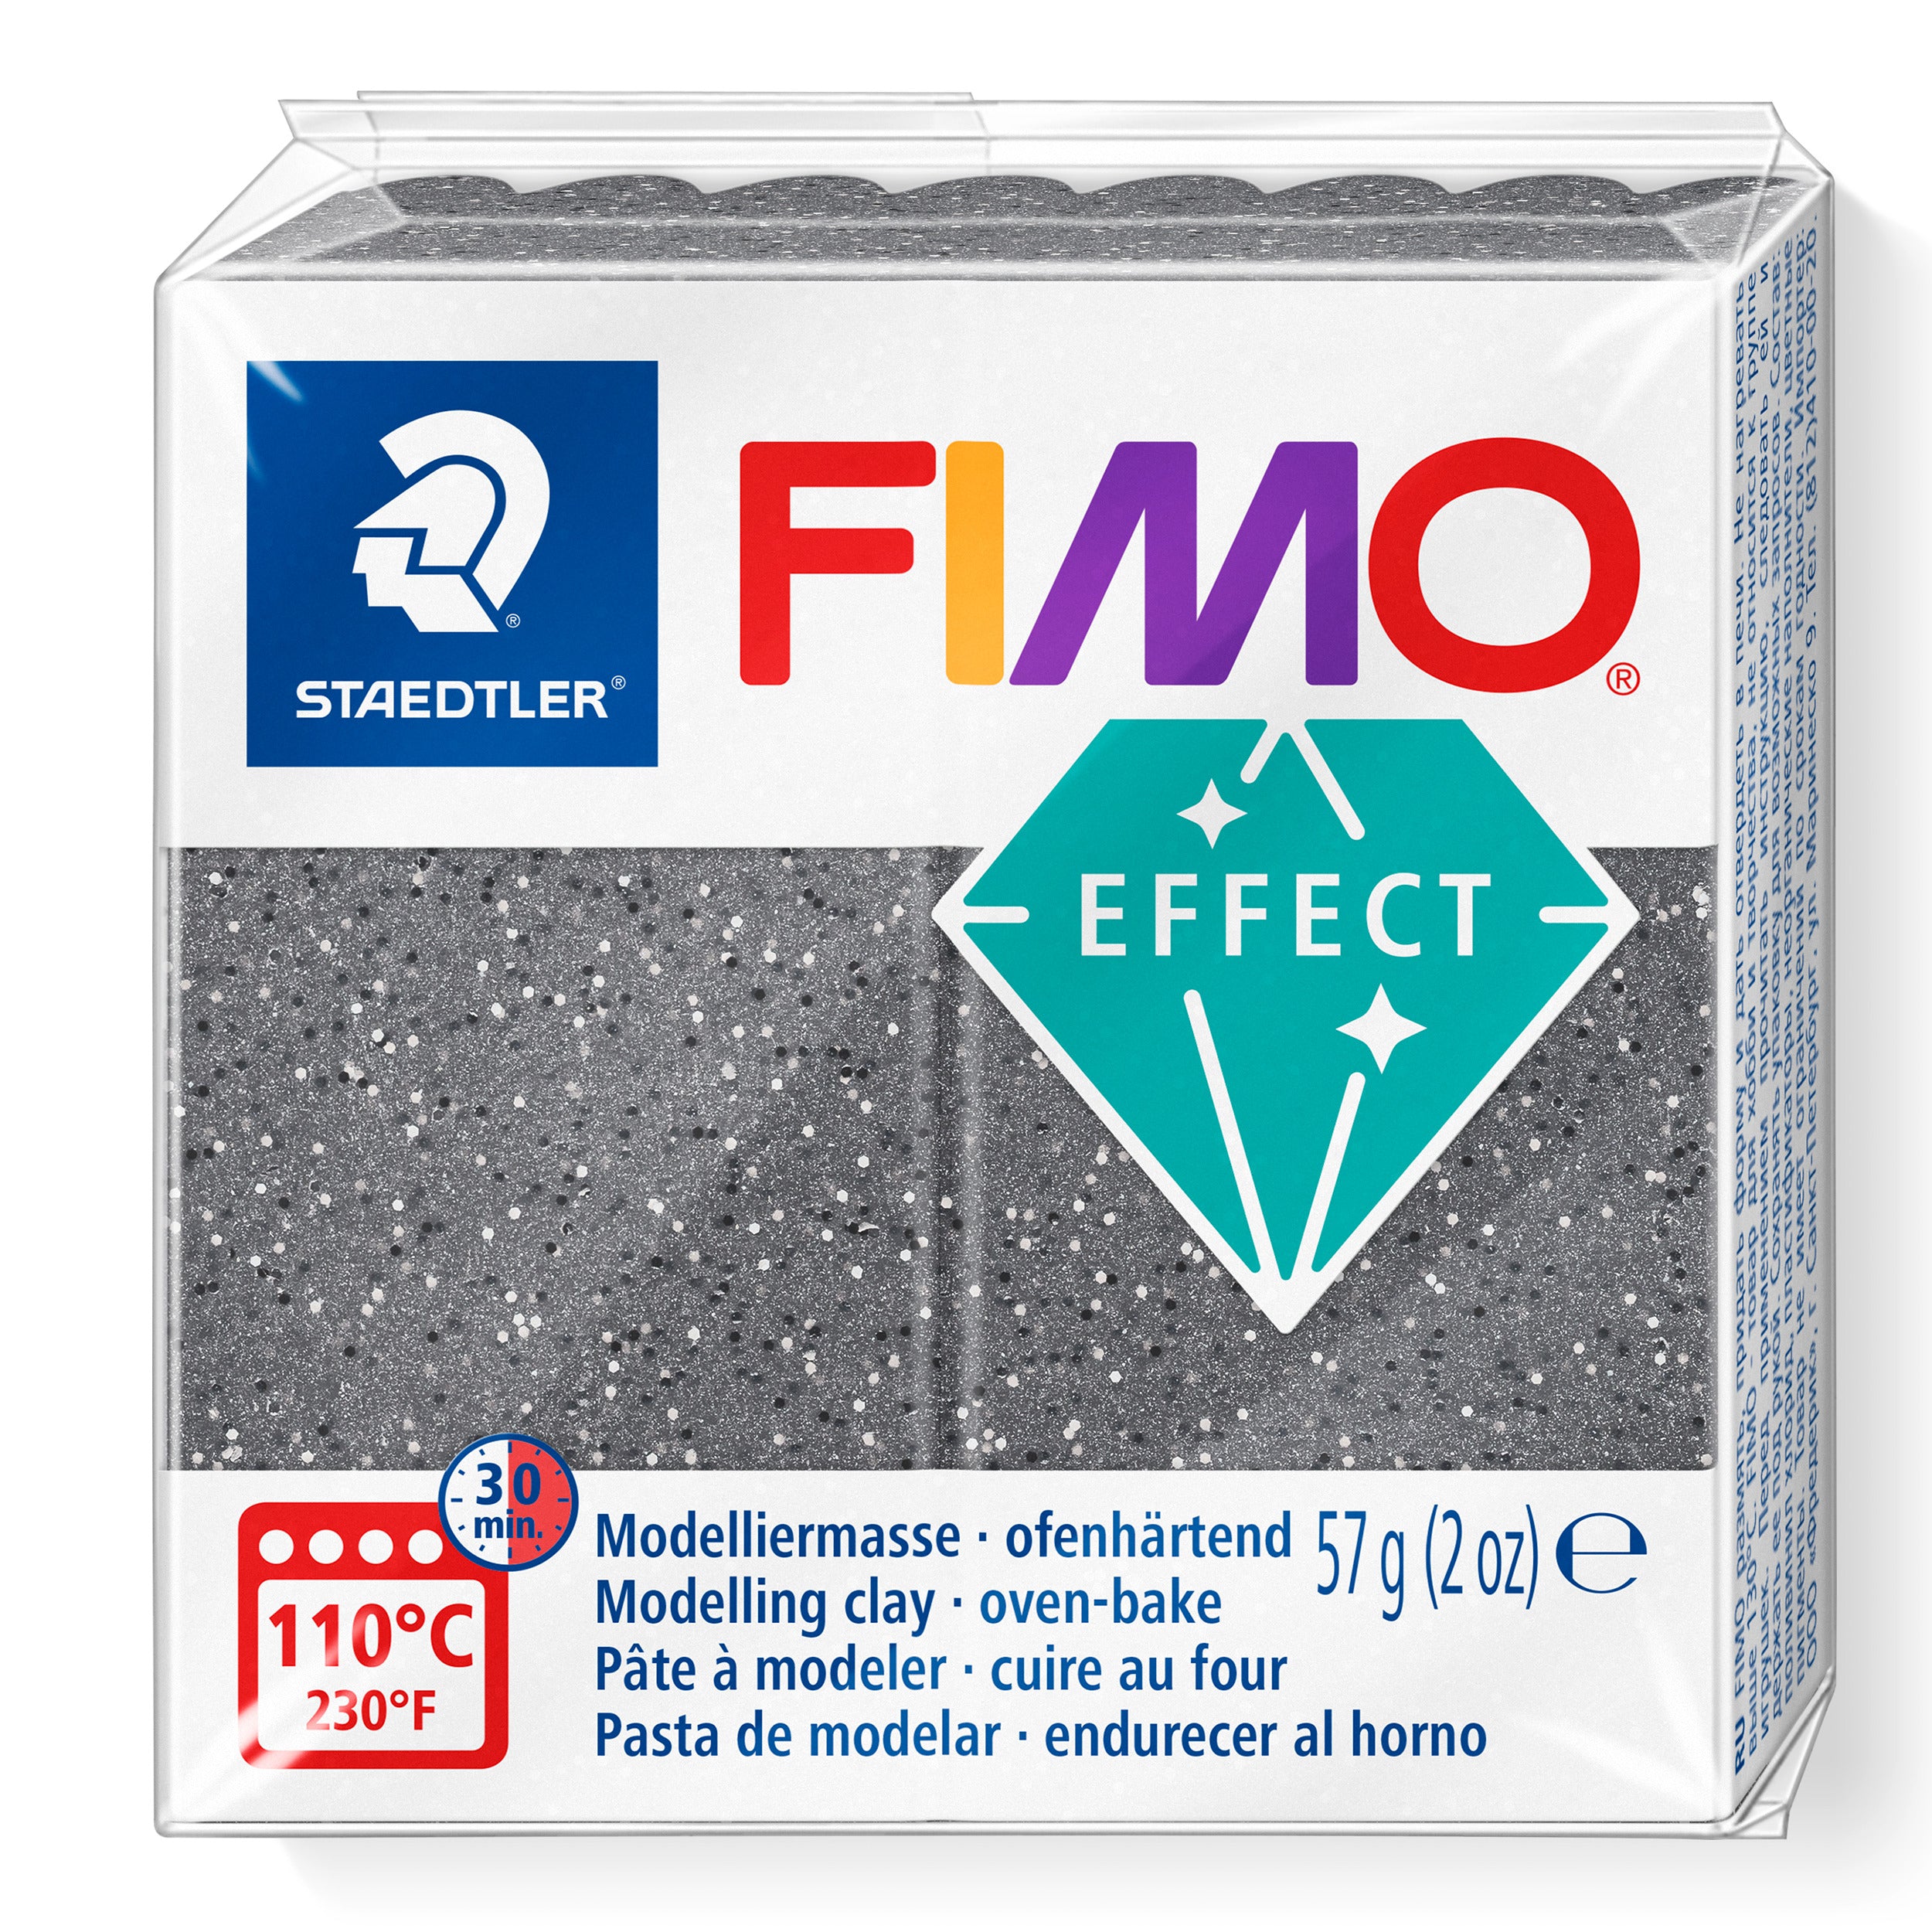 NEW Stone Granite FIMO Effects Polymer Clay 57g 8010-803